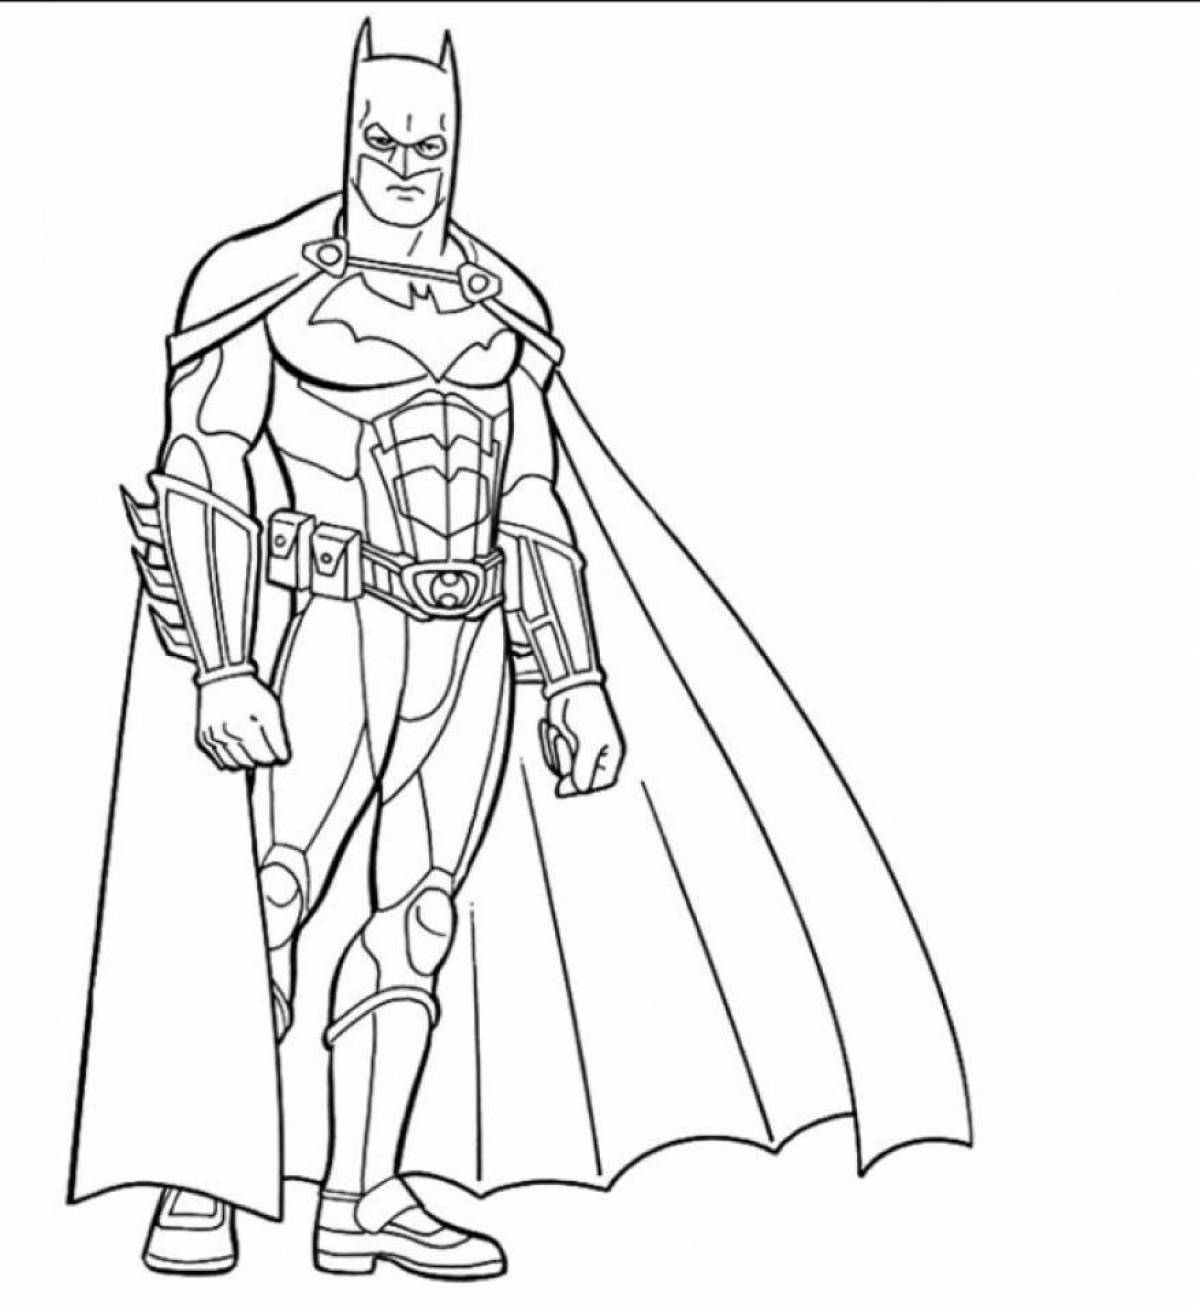 Colorful dark knight coloring page